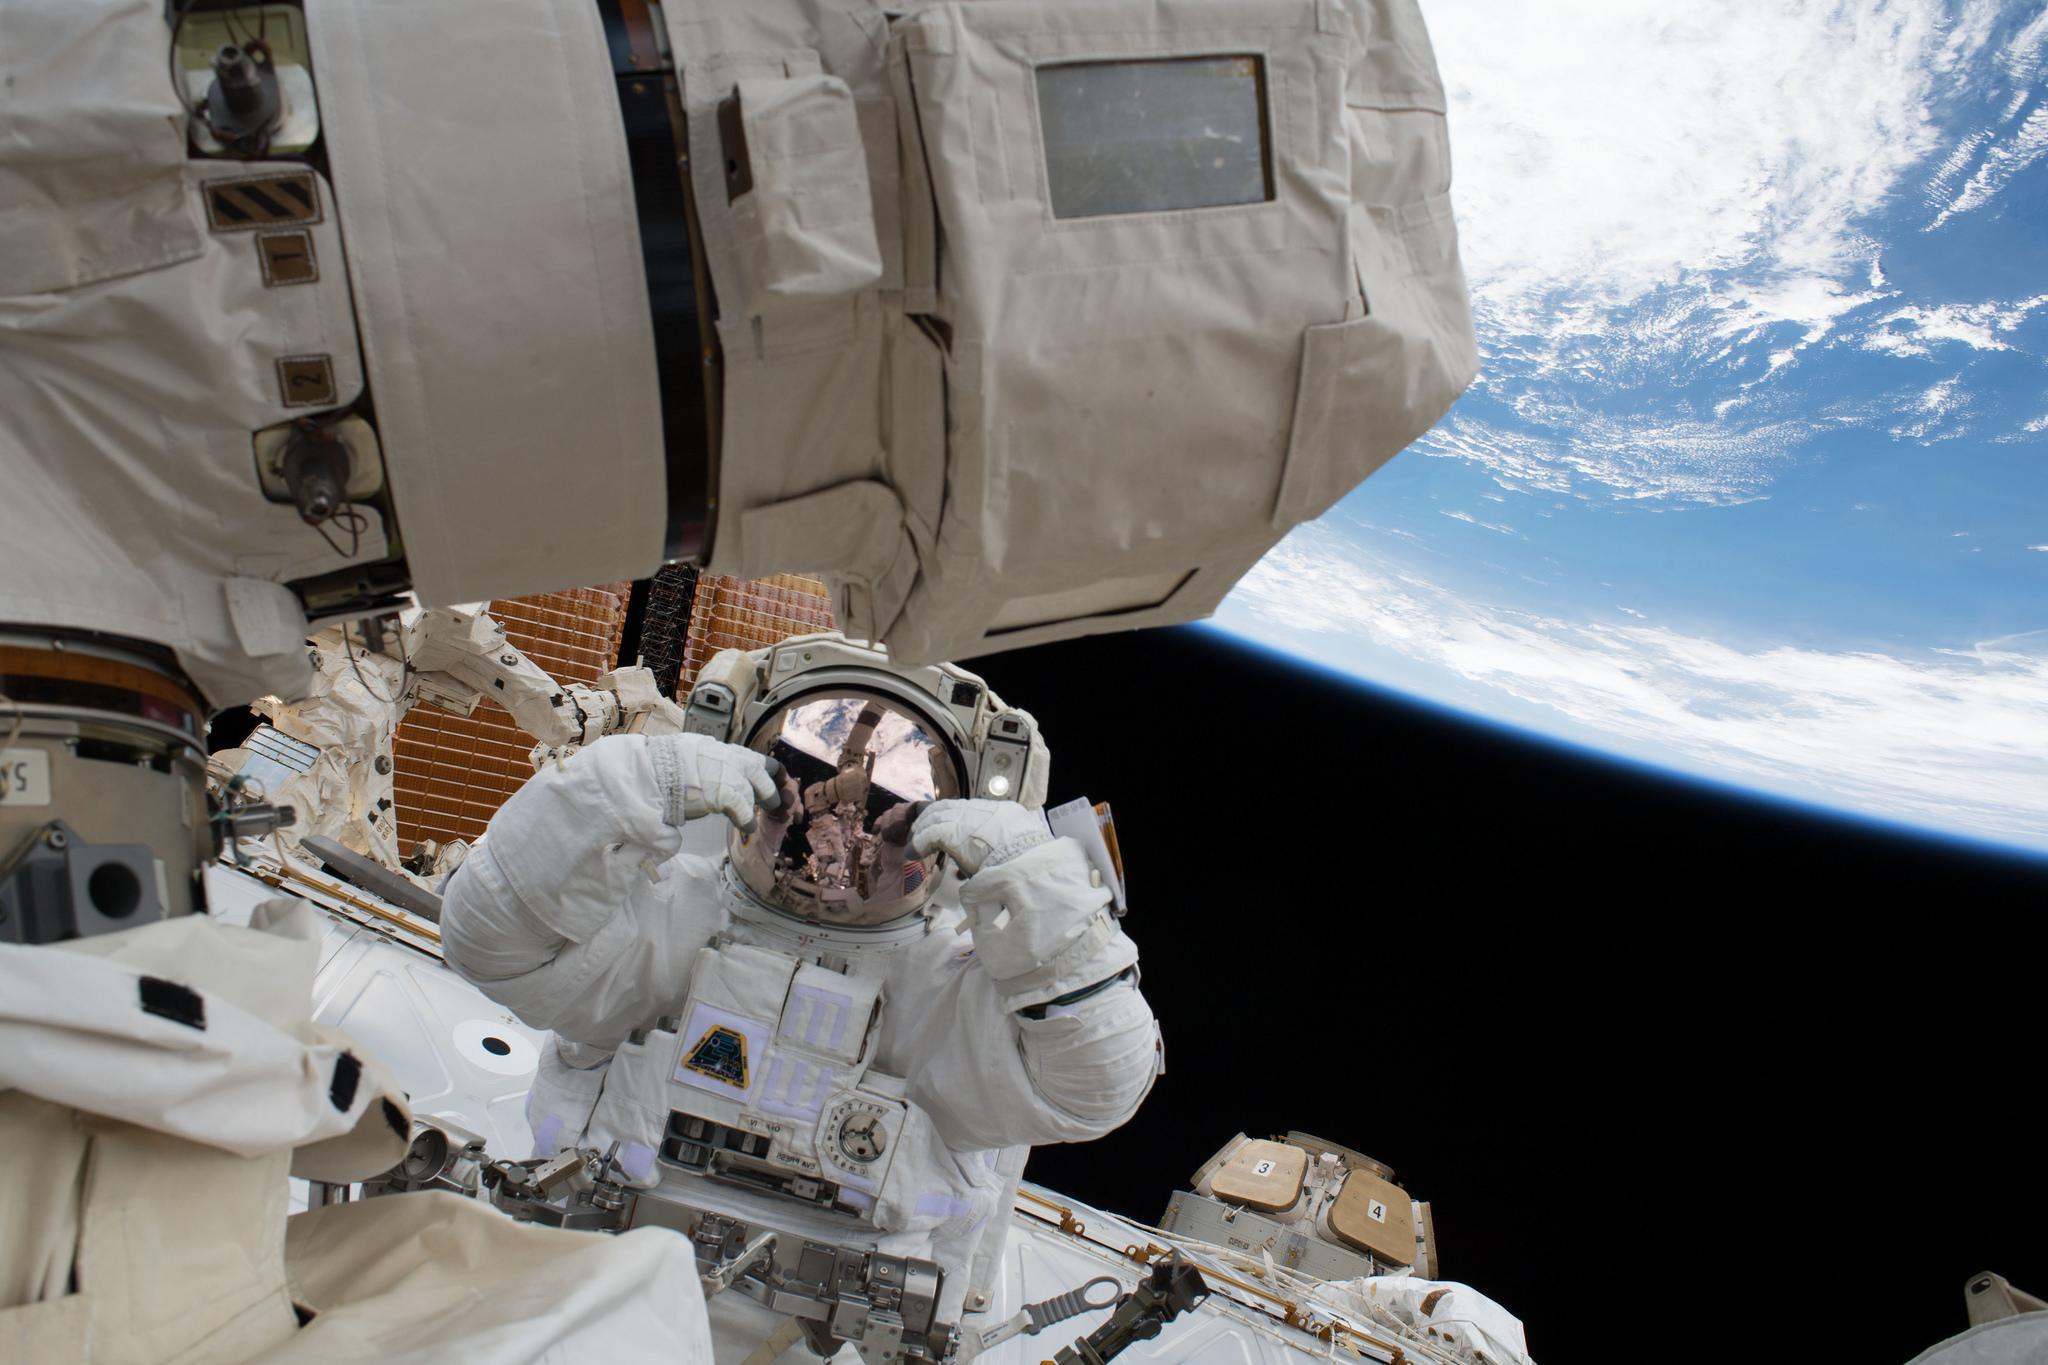 NASA astronaut Scott Tingle is pictured during a spacewalk on Jan. 23, 2018